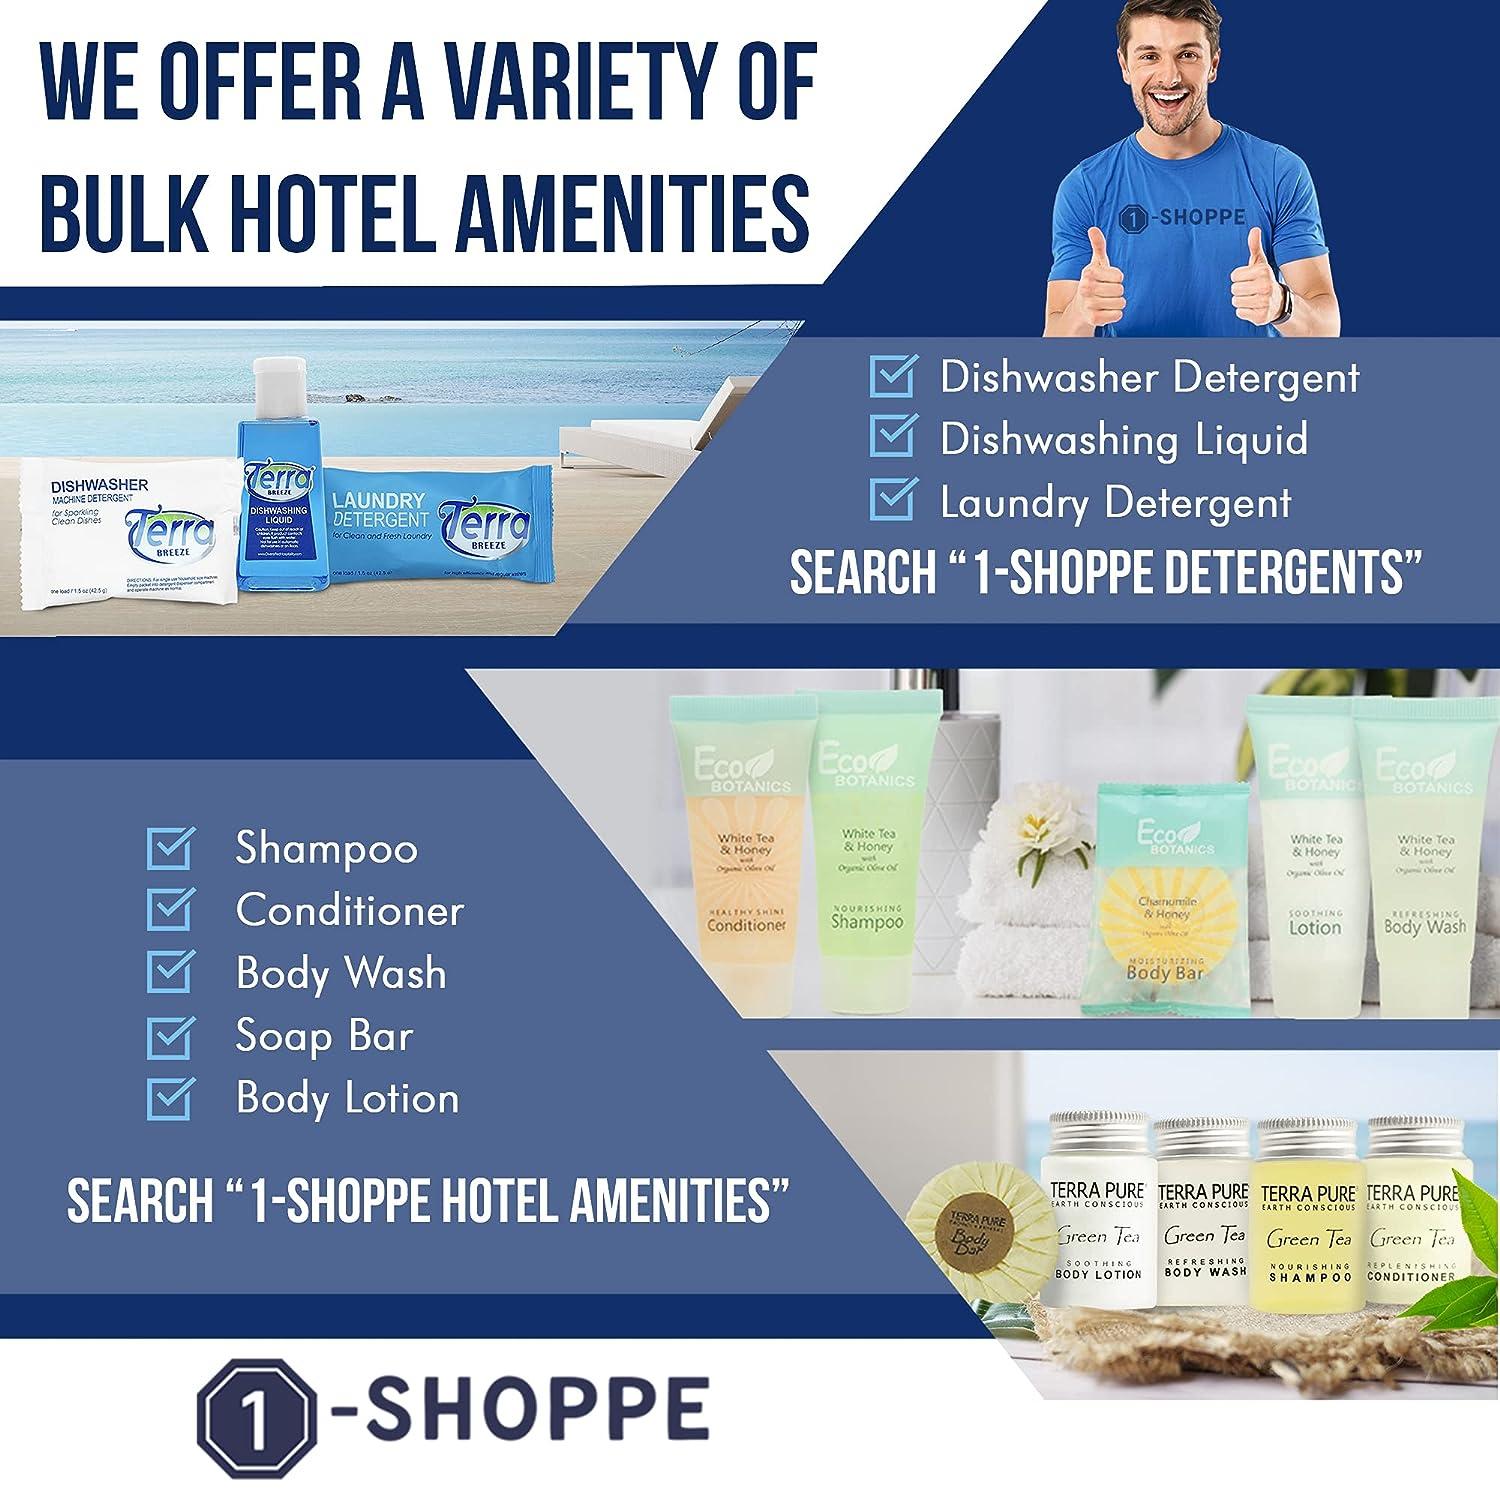 Personal Care Travel Size Toiletries|1-Shoppe All-in-Kit Hotel Amenities  Bulk|Travel Shaving Set, Toothbrush & Paste, Mouthwash, Makeup Wipes,  Swabs